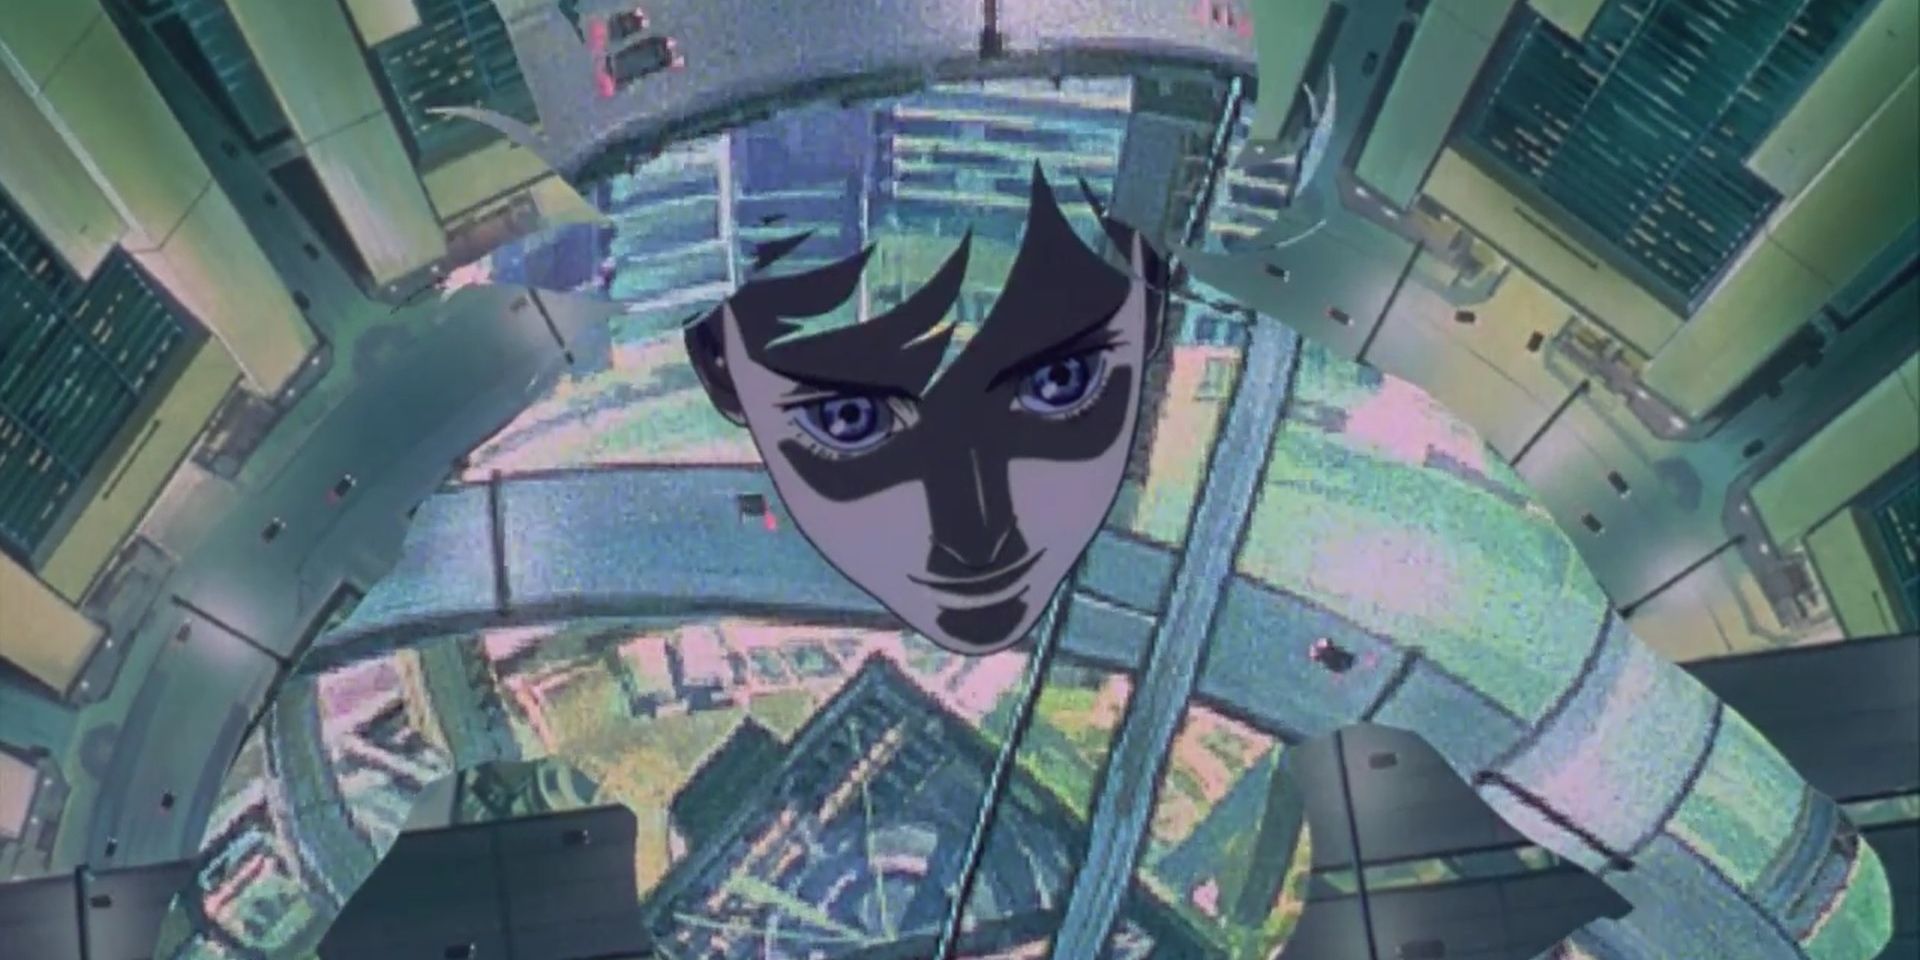 An image from Ghost in the Shell.